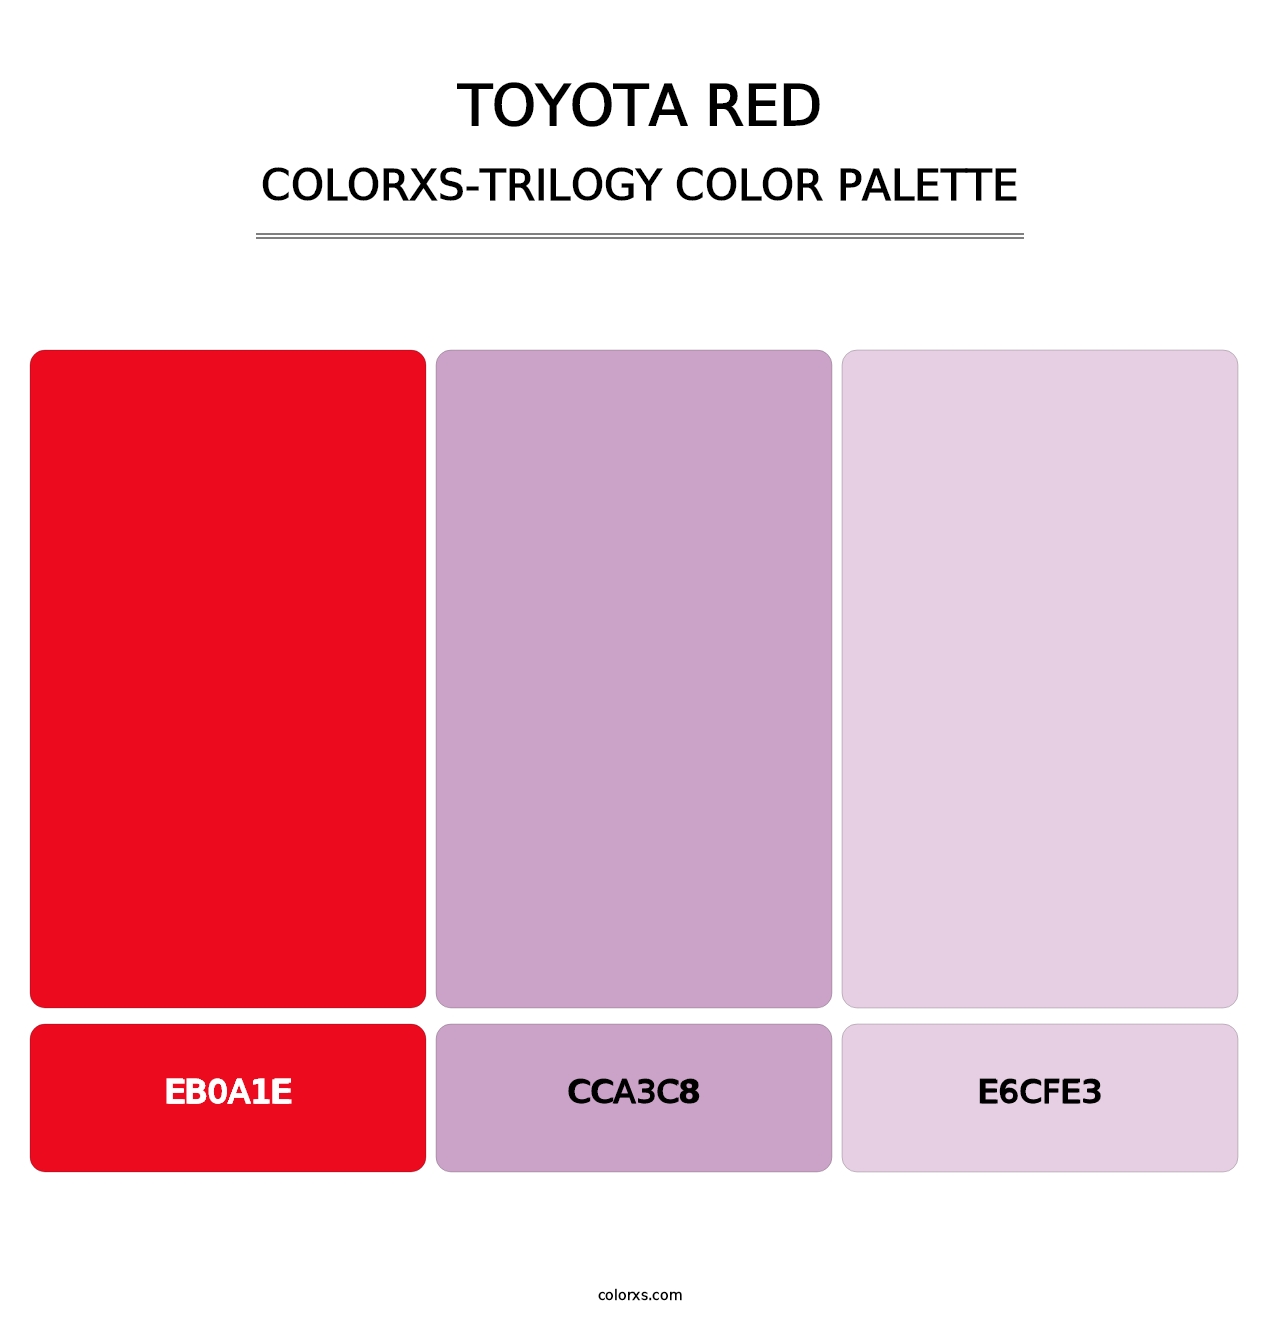 Toyota Red - Colorxs Trilogy Palette